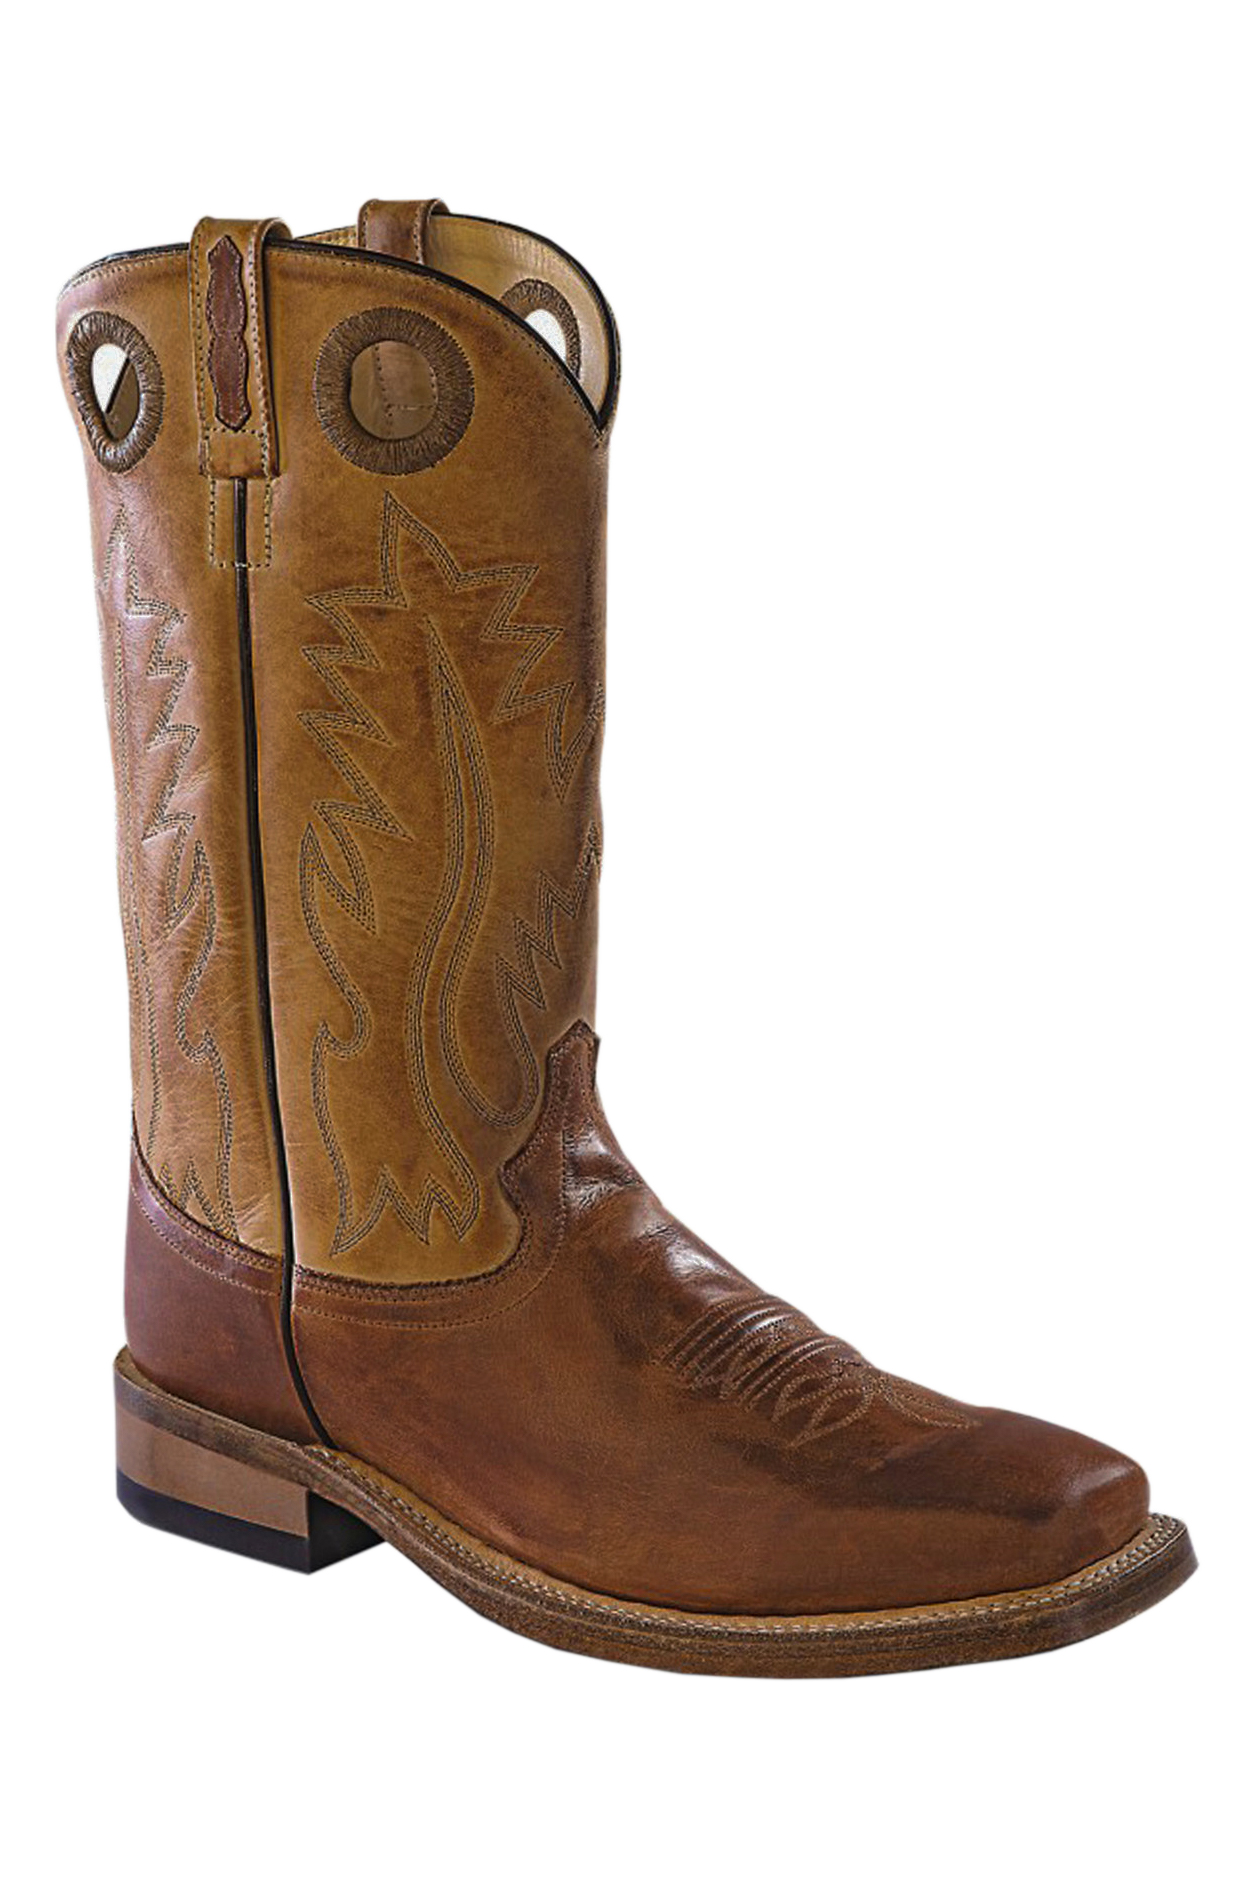 Old West Two Tone Western Cowboy Boots